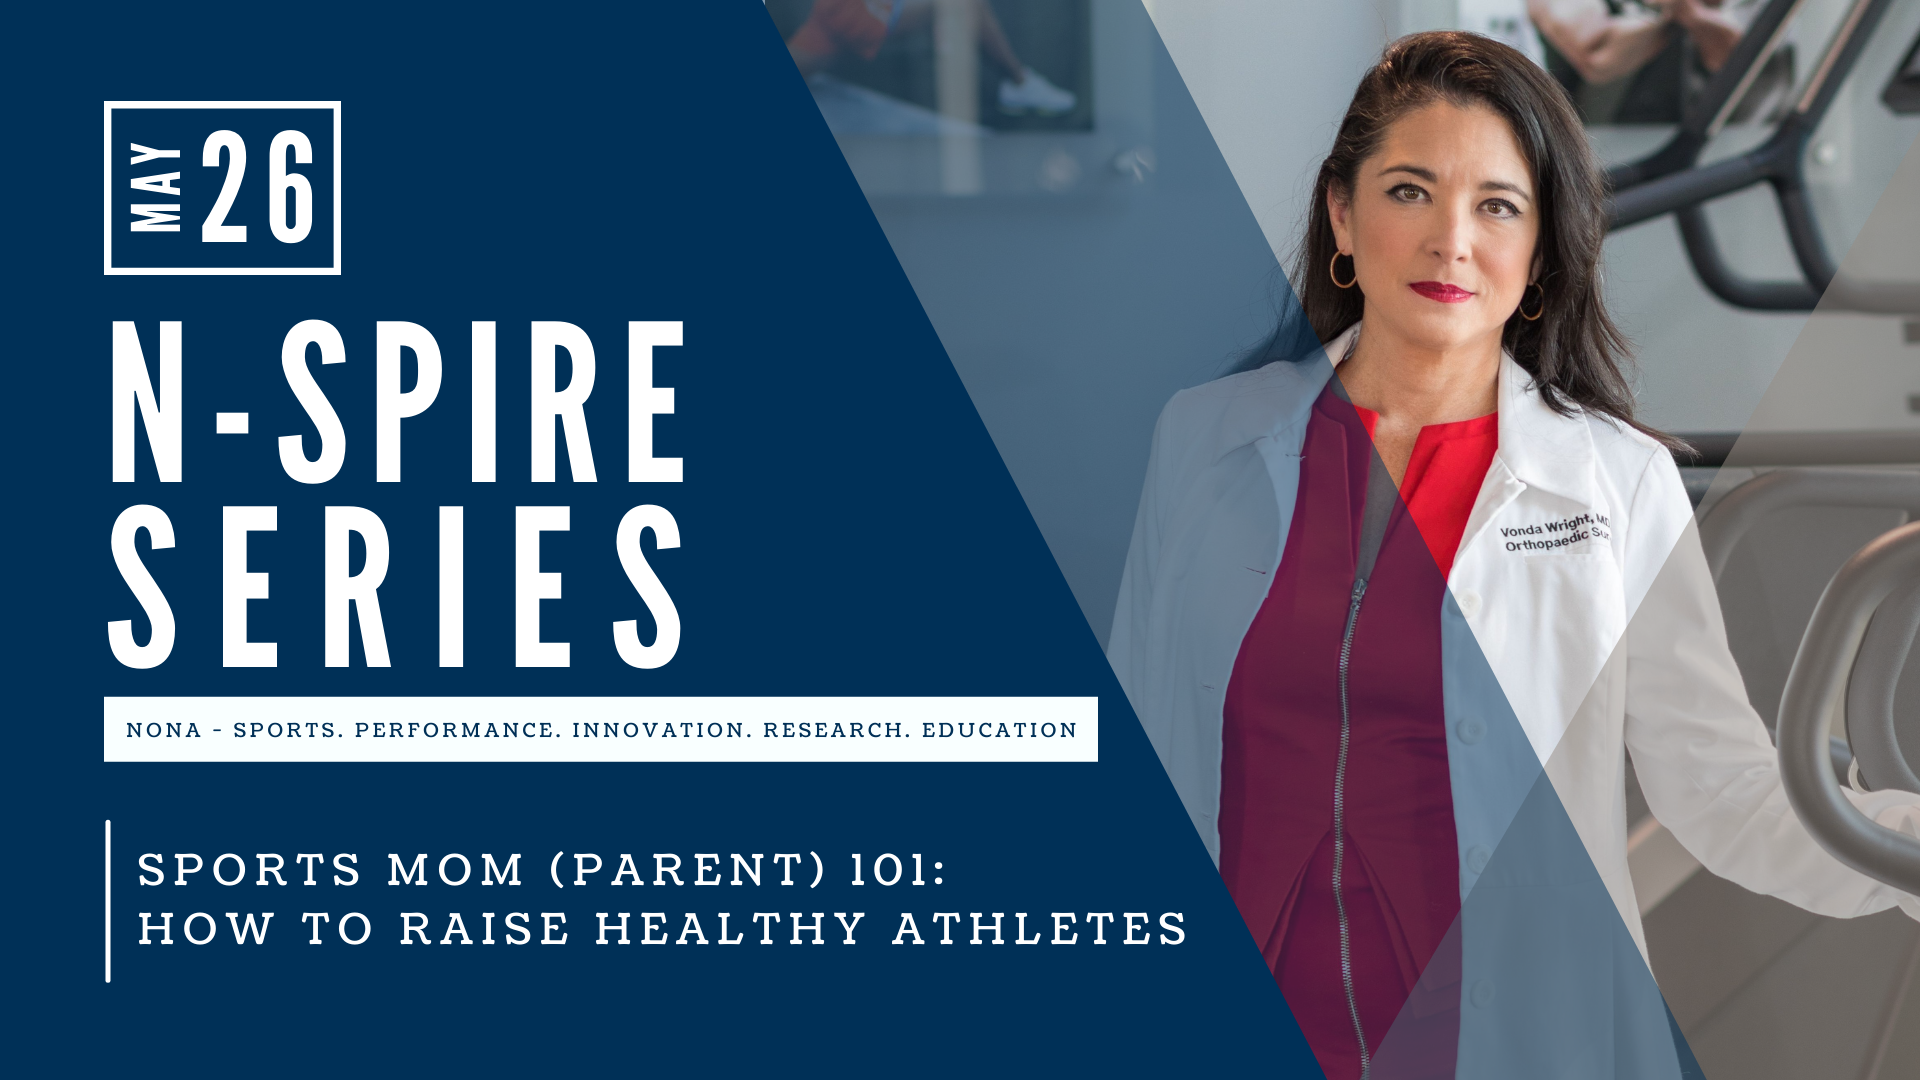 How to Raise Healthy Athletes Event